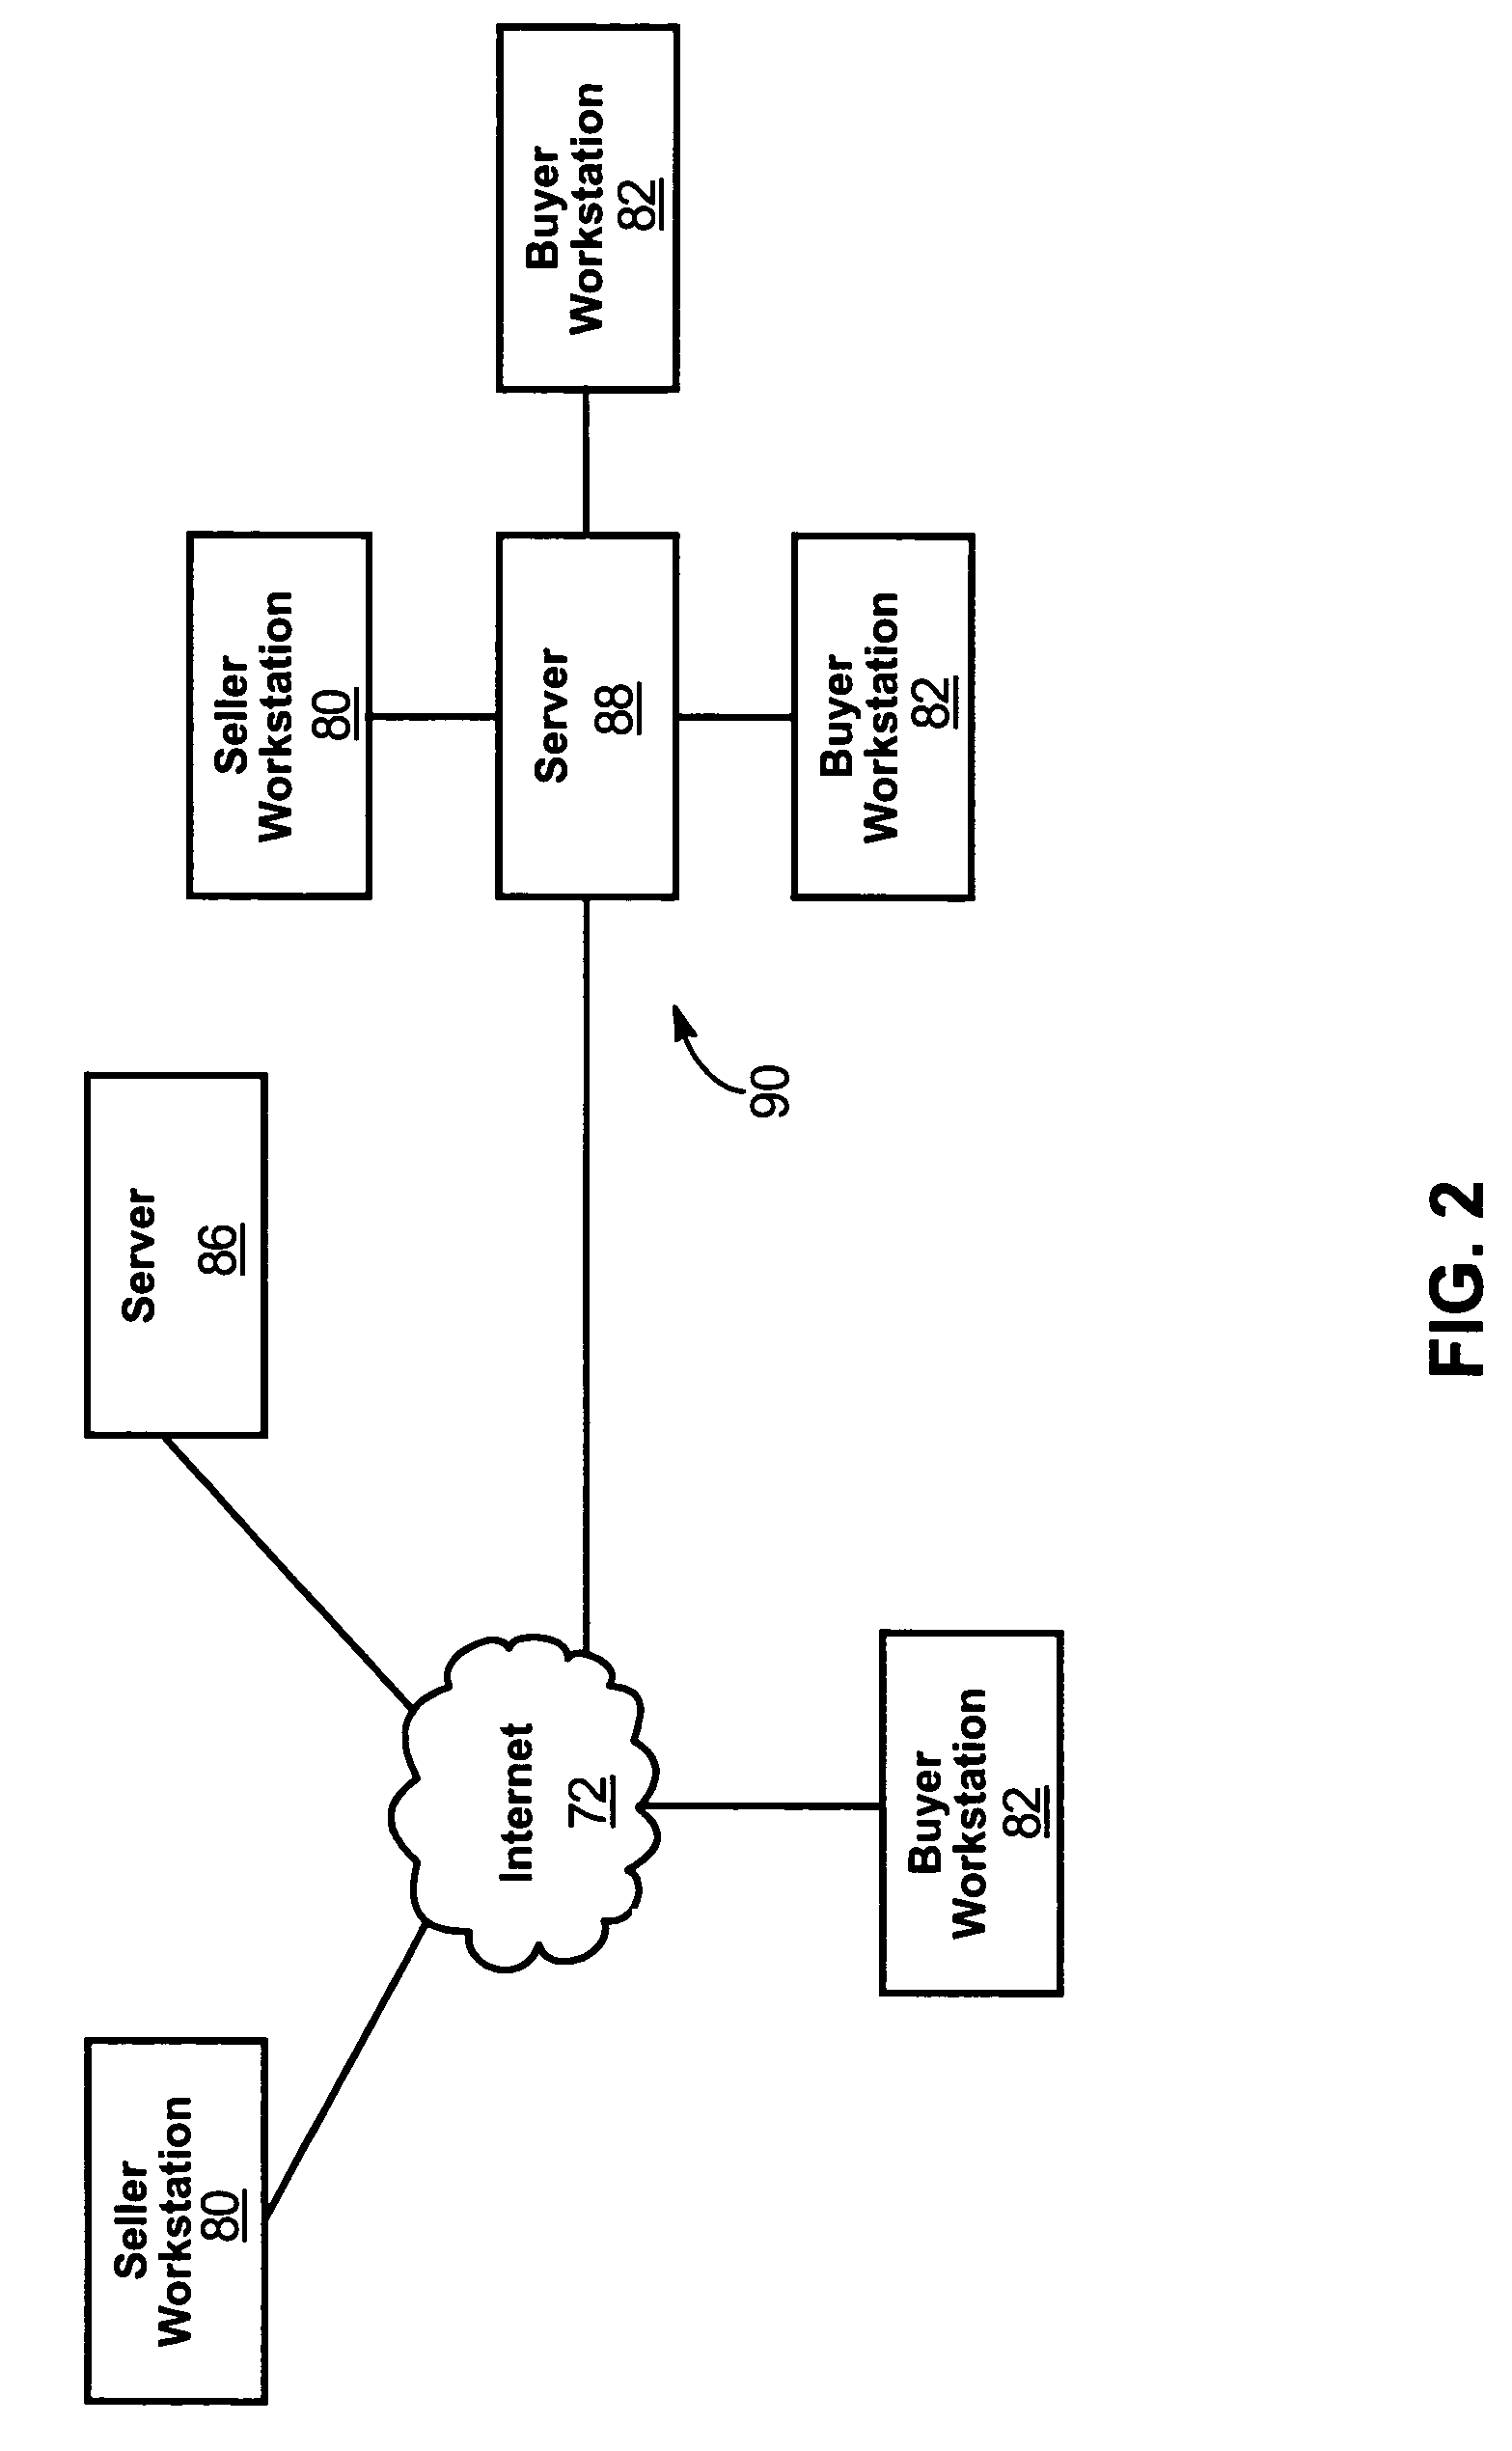 Online transaction hosting apparatus and system